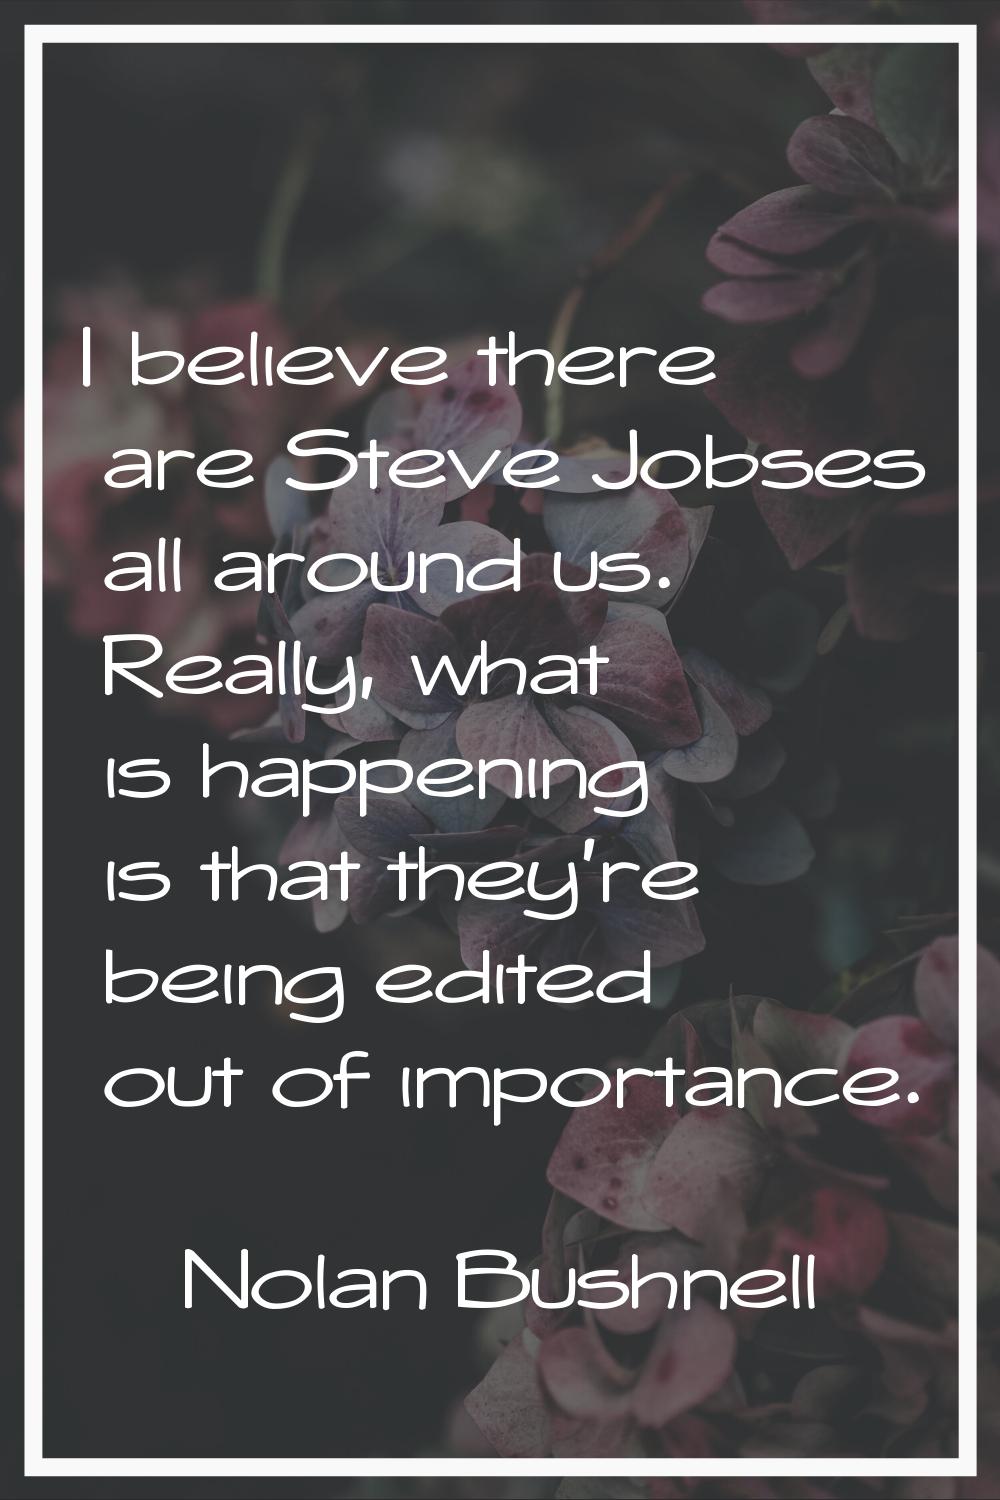 I believe there are Steve Jobses all around us. Really, what is happening is that they're being edi